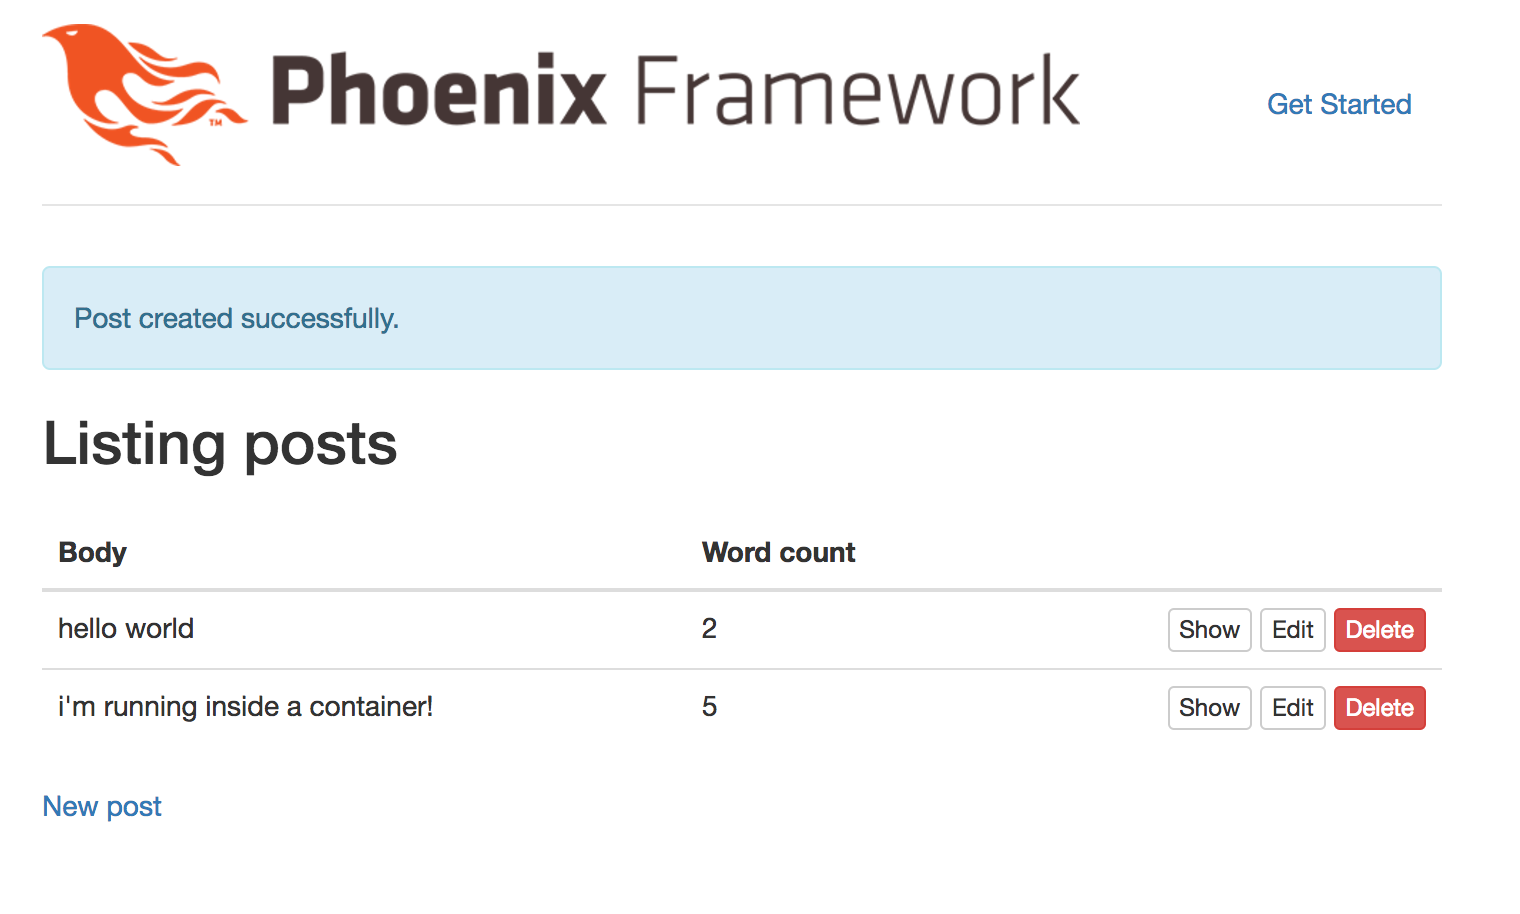 deploying-your-phoenix-applications-in-production-using-docker